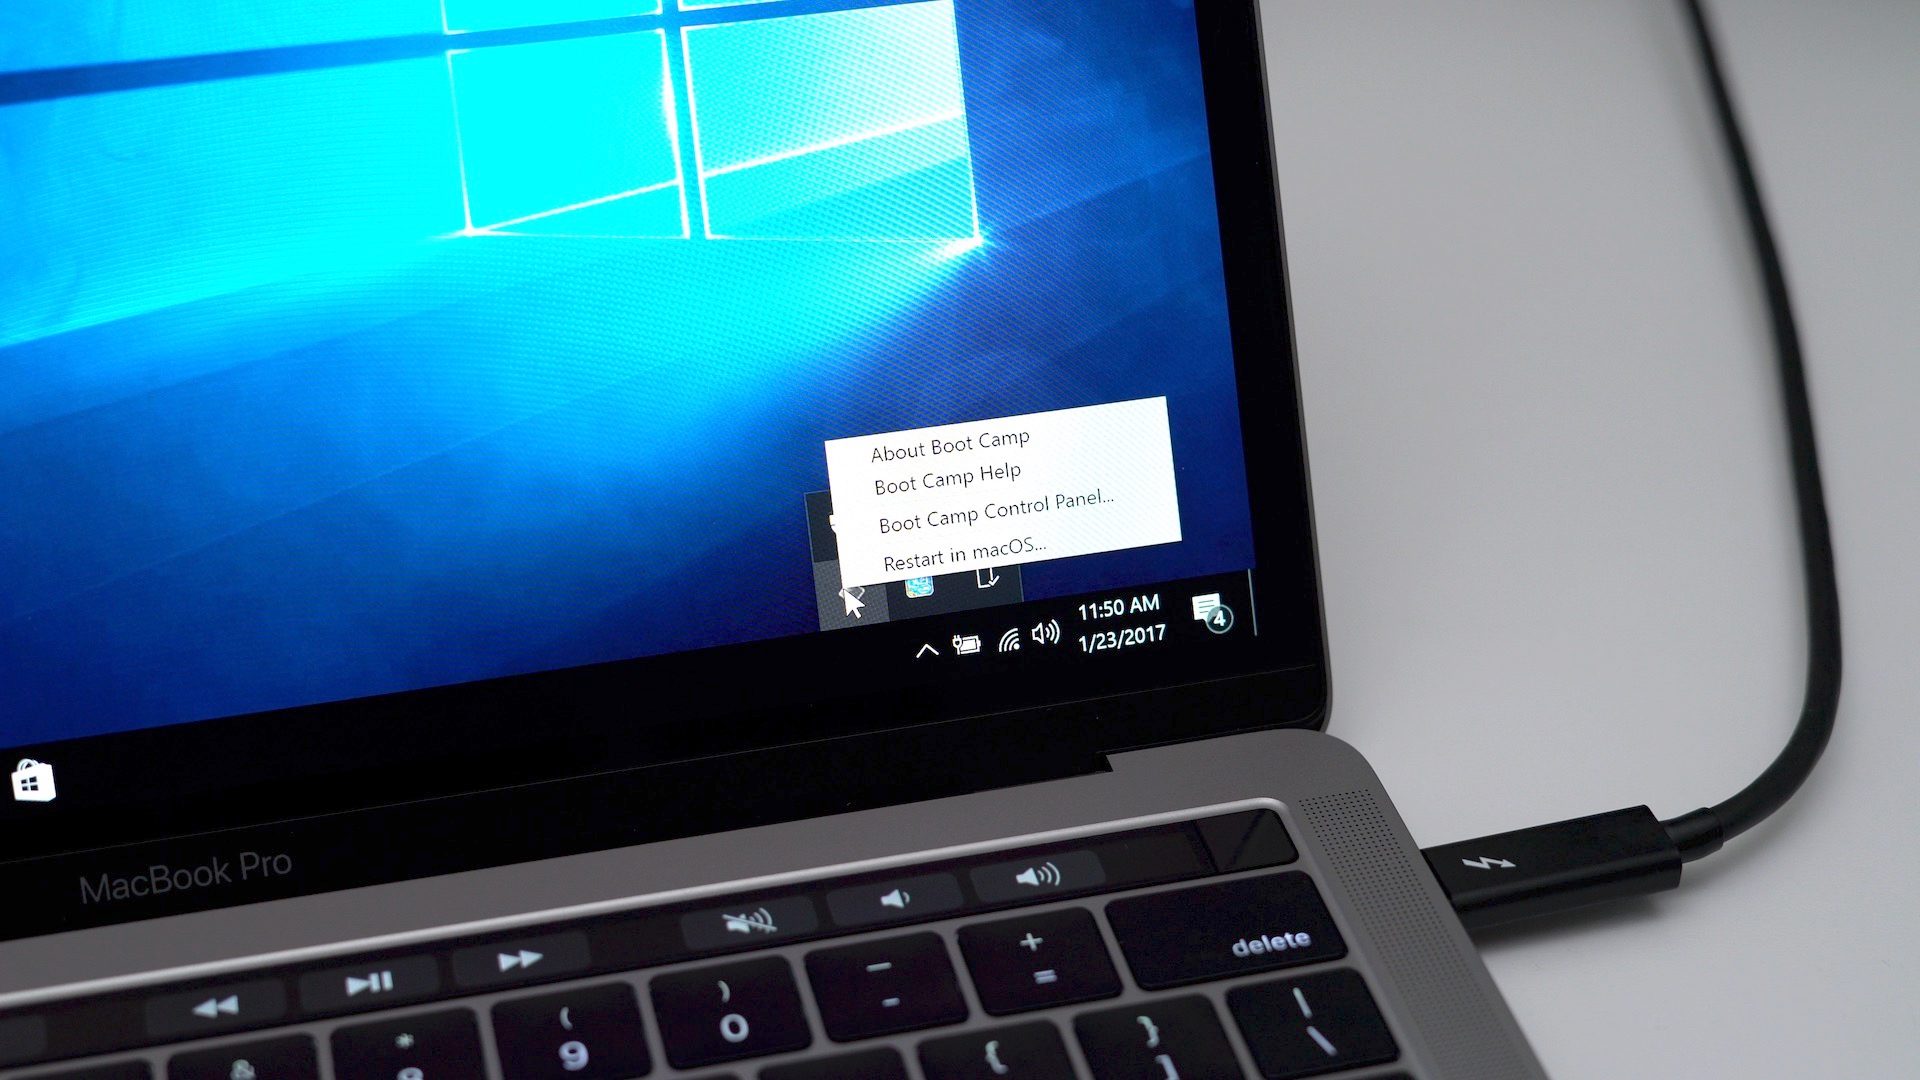 Install windows 10 on your mac with boot camp assistant windows 7